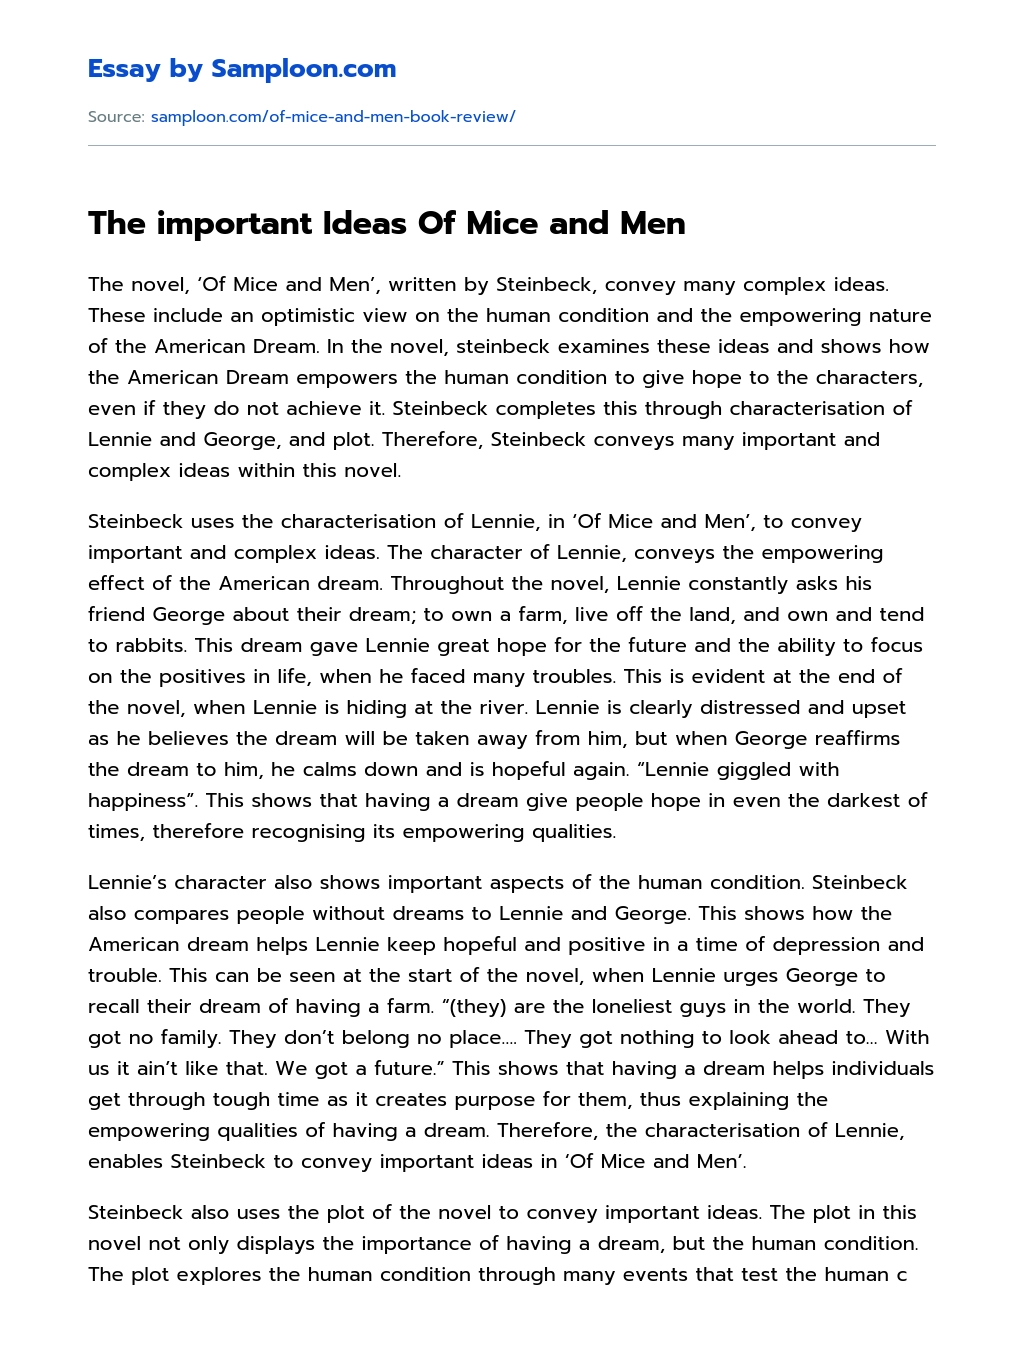 The important Ideas Of Mice and Men Book Review essay